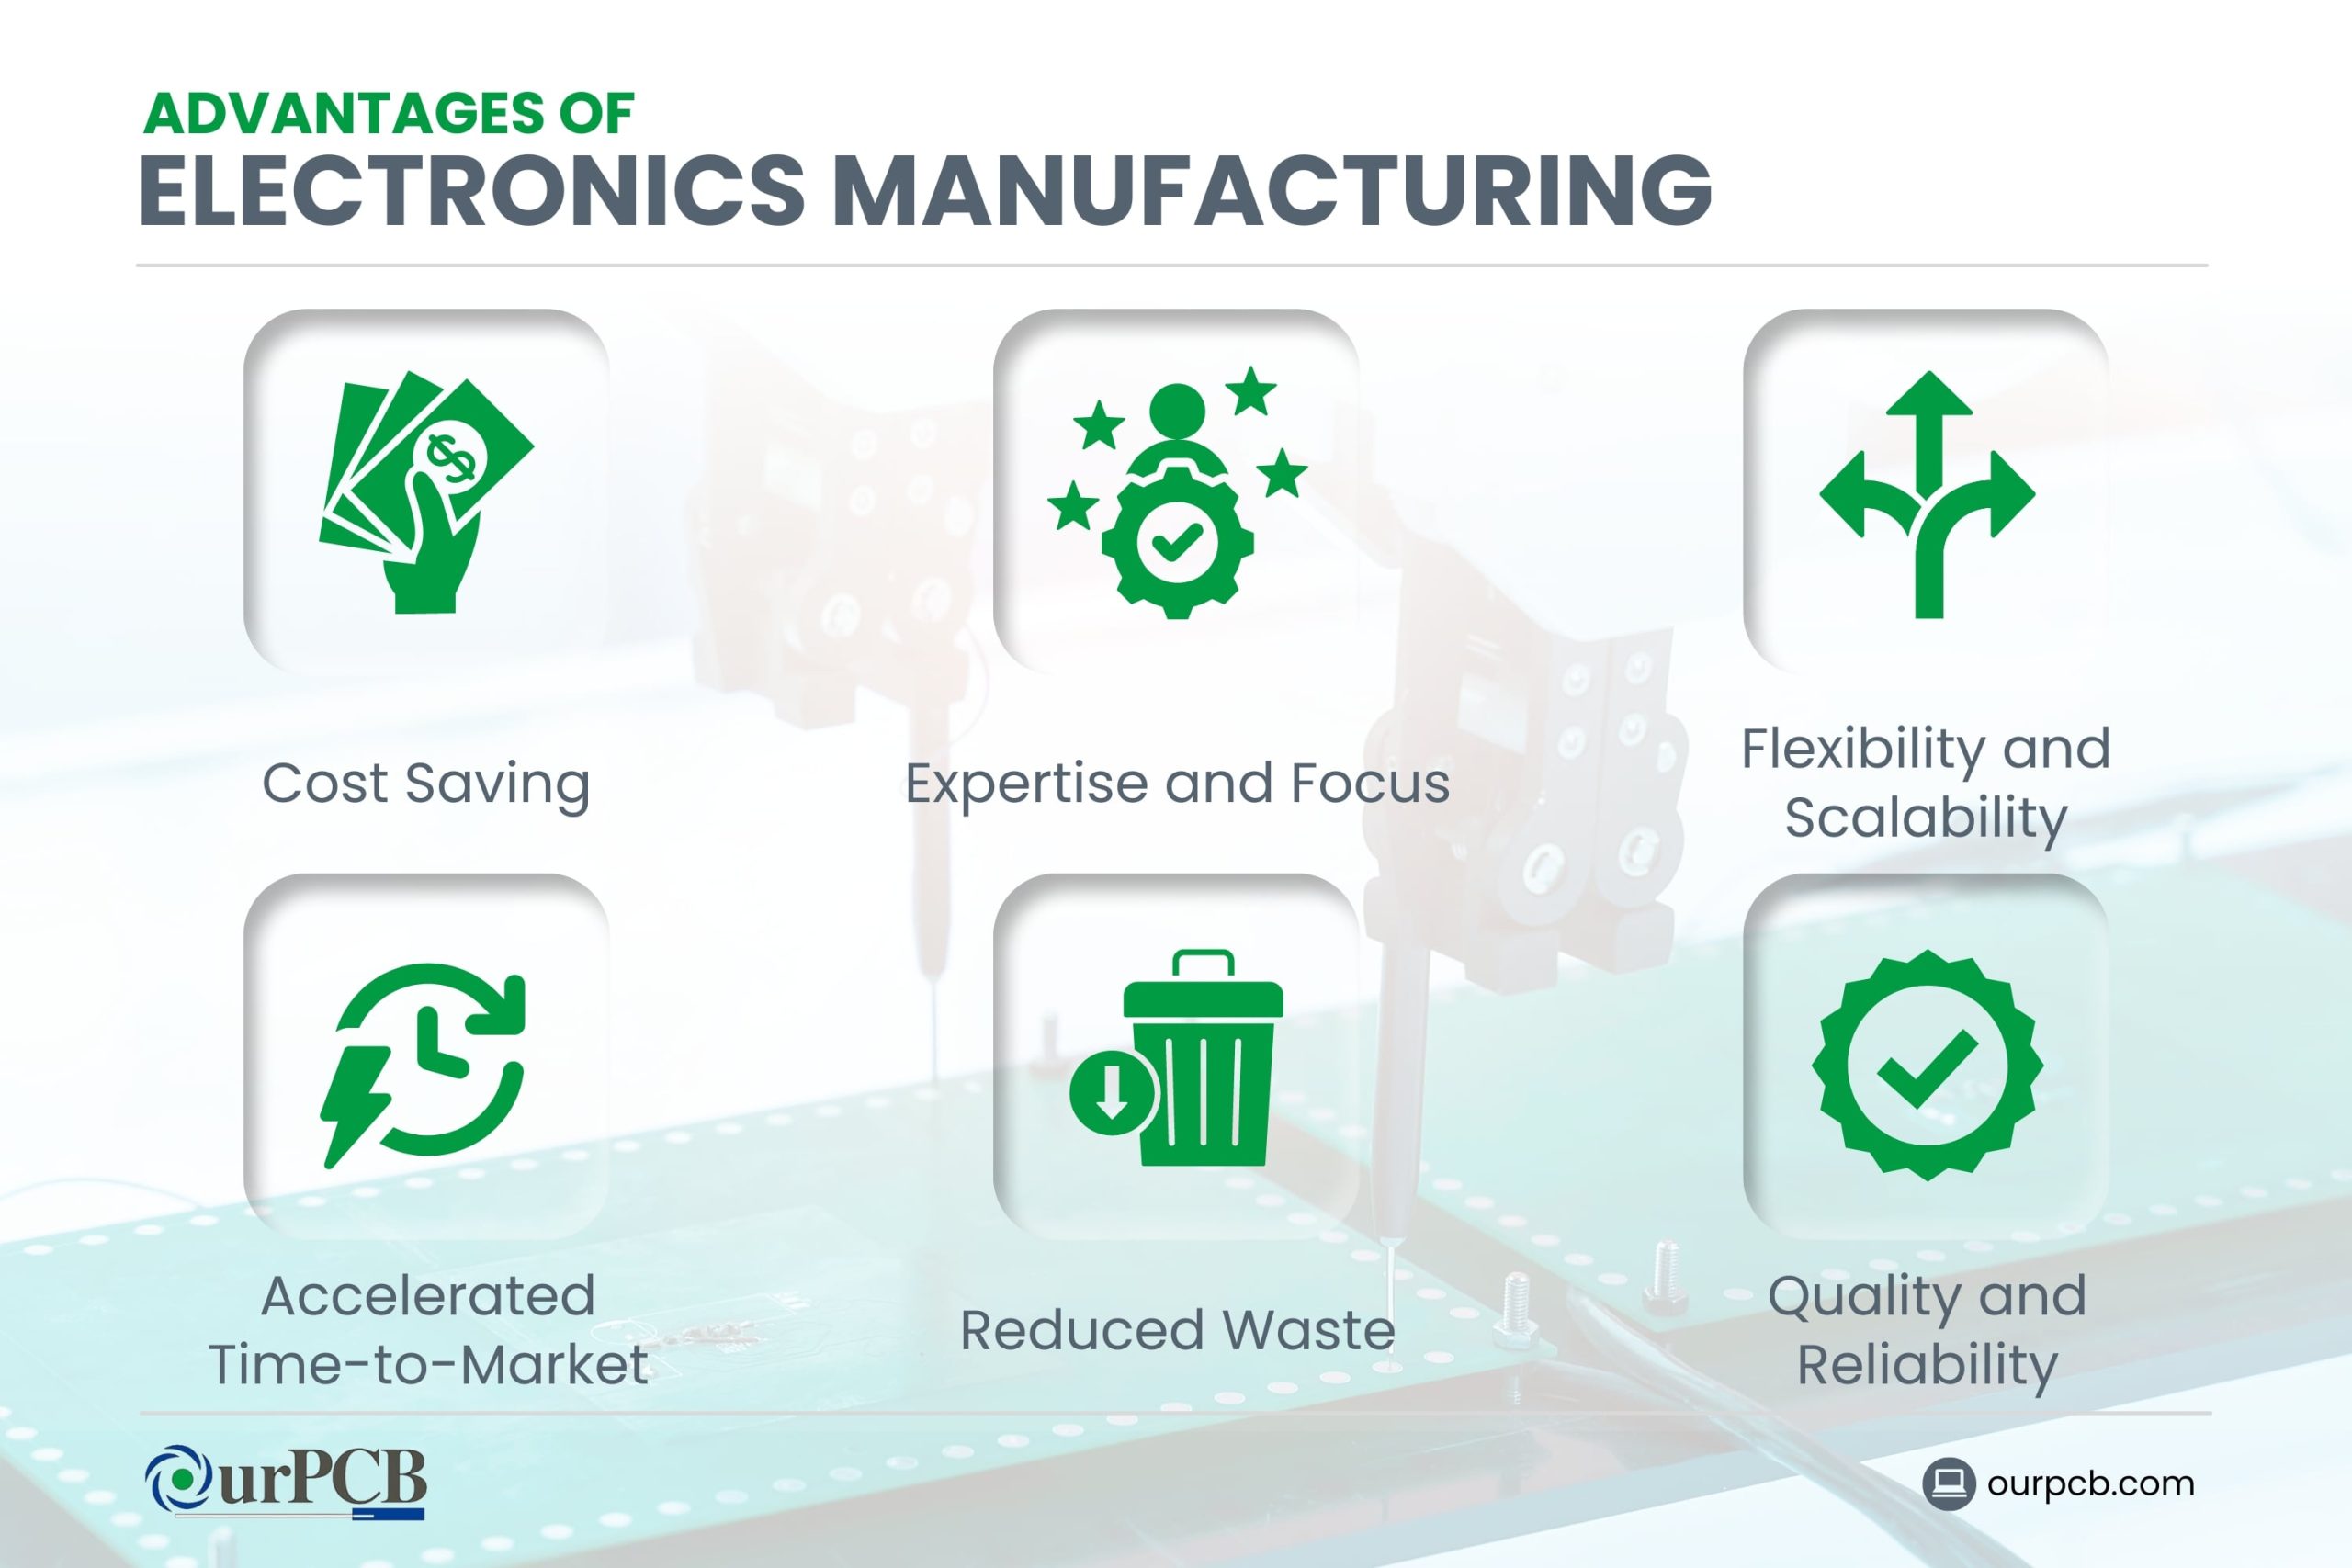 What are the Advantages of Electronics Manufacturing